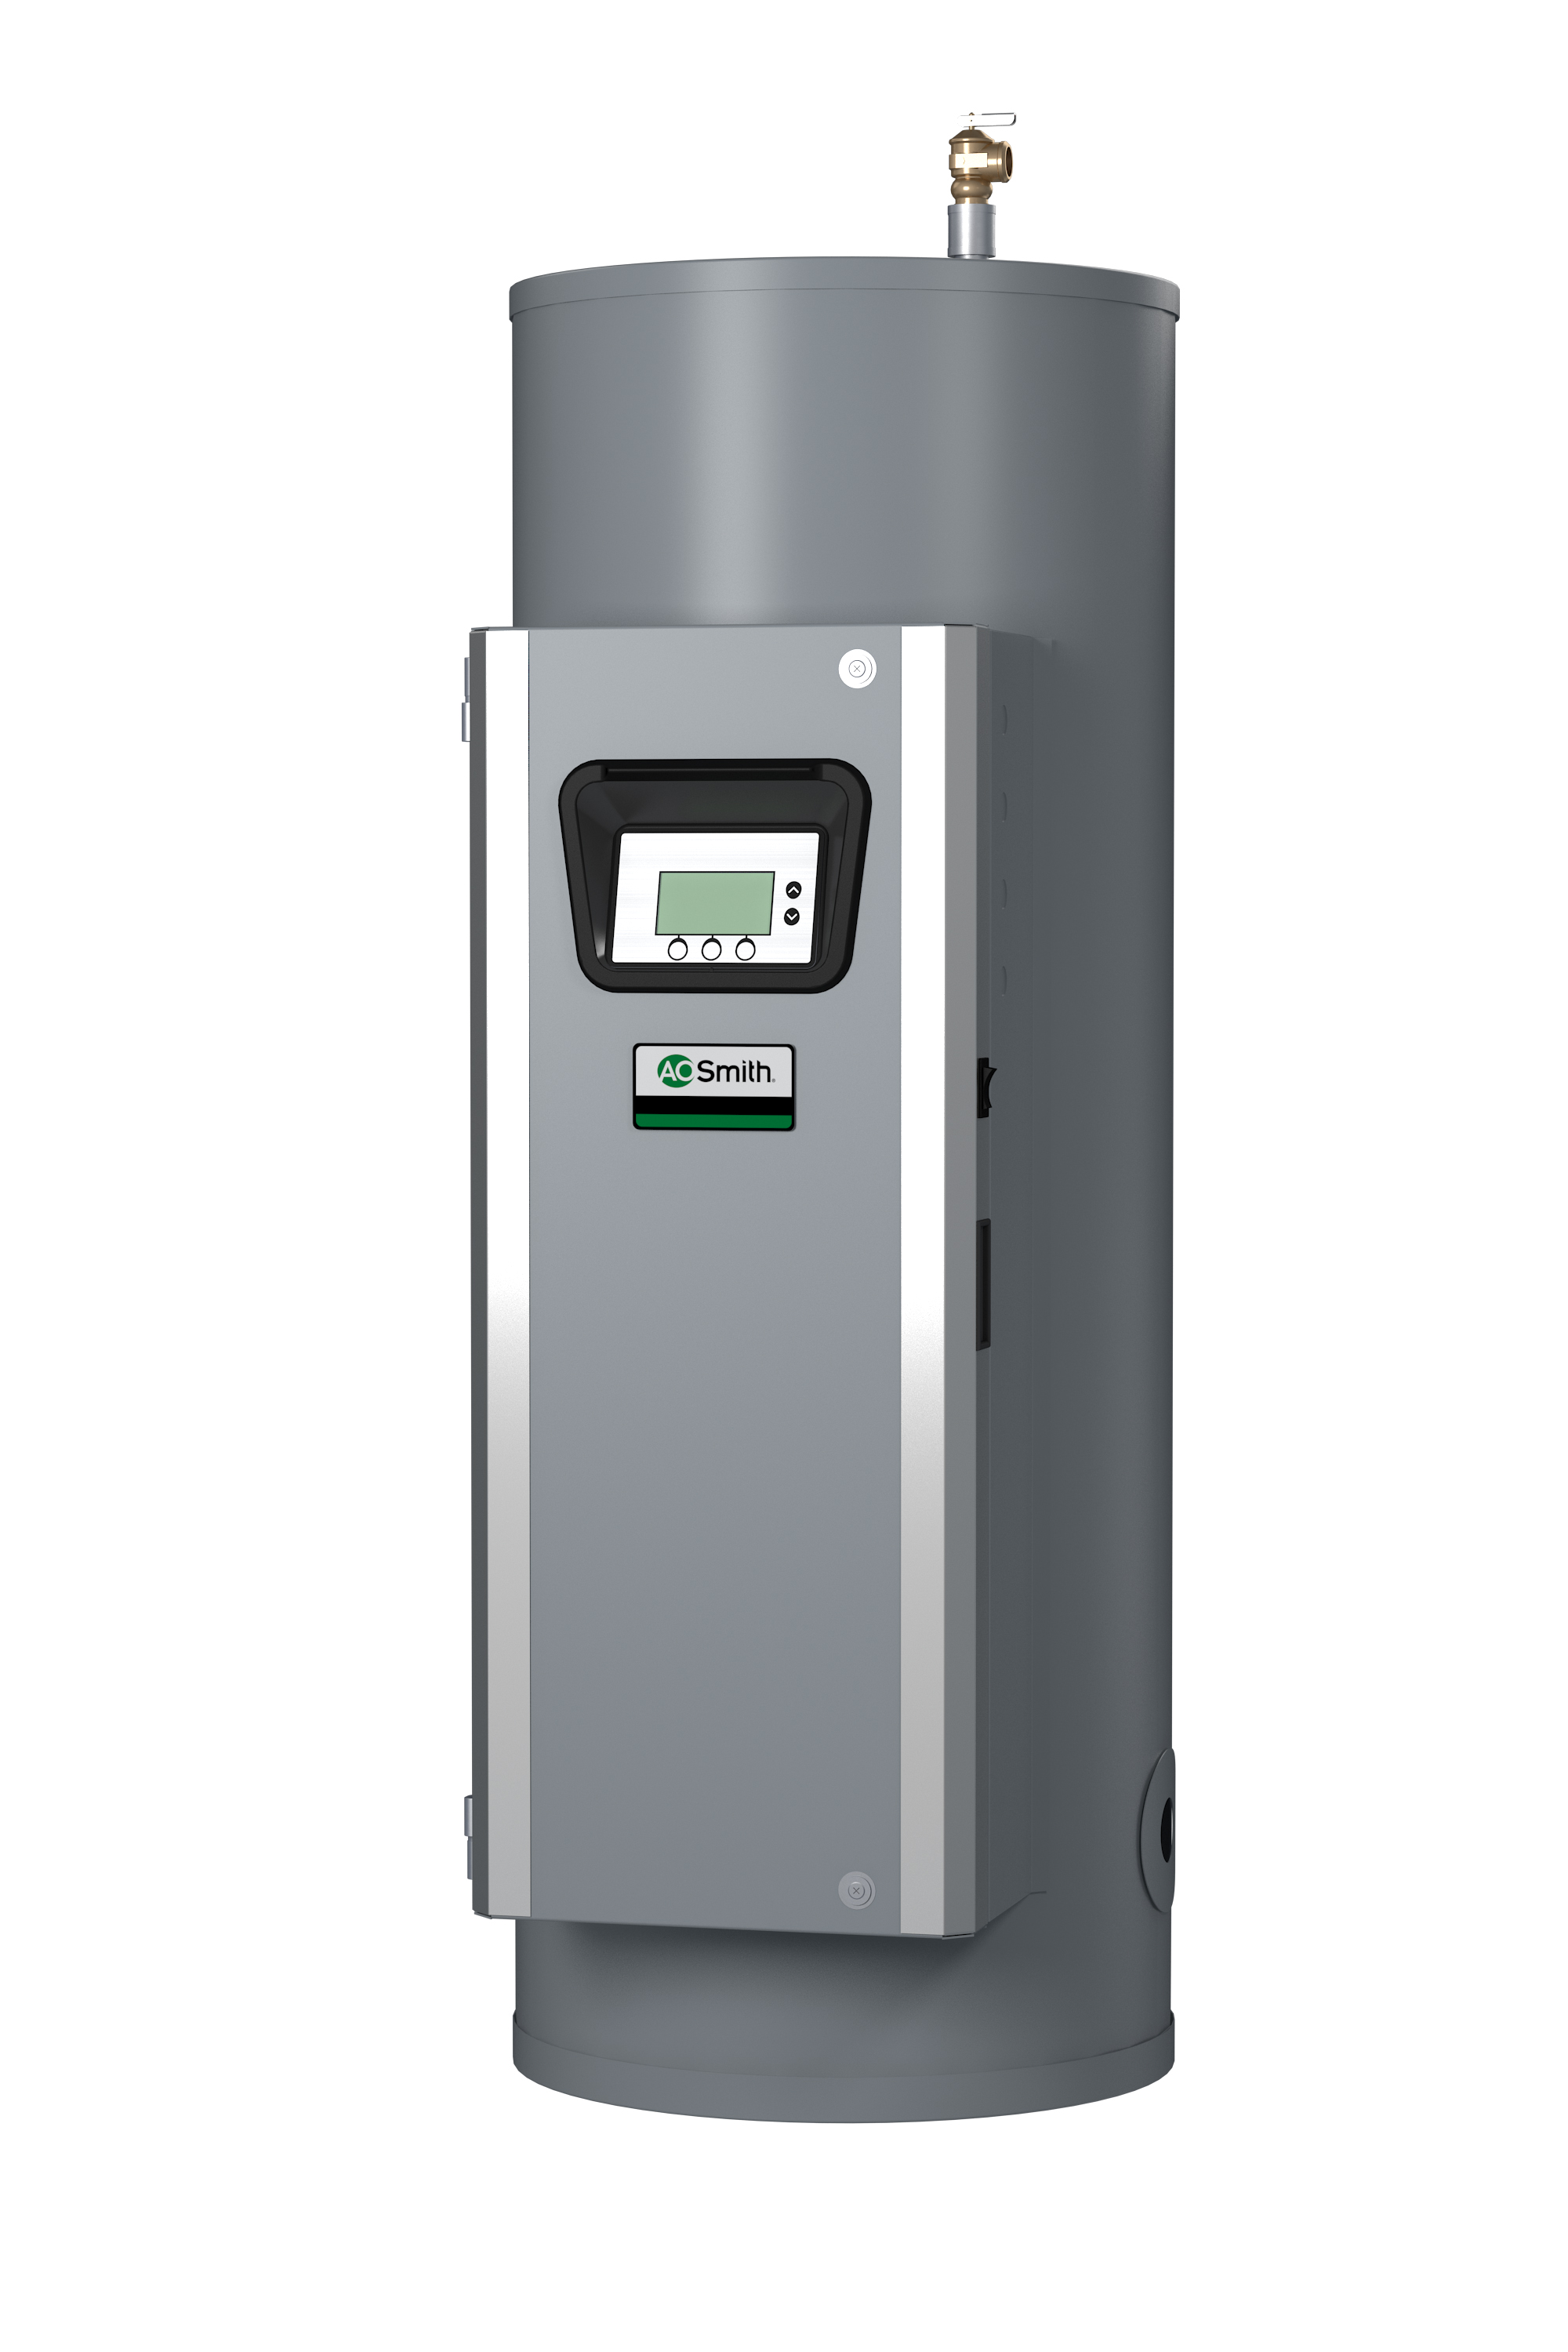 AO SMITH DSE-40A-15, 40 GALLONS, 15KW, 480 VOLT, 31.3 AMPS, 1 PHASE, 1 ELEMENT, ASME CUSTOM Xi SERIES HEAVY DUTY COMMERCIAL ELECTRIC WATER HEATER